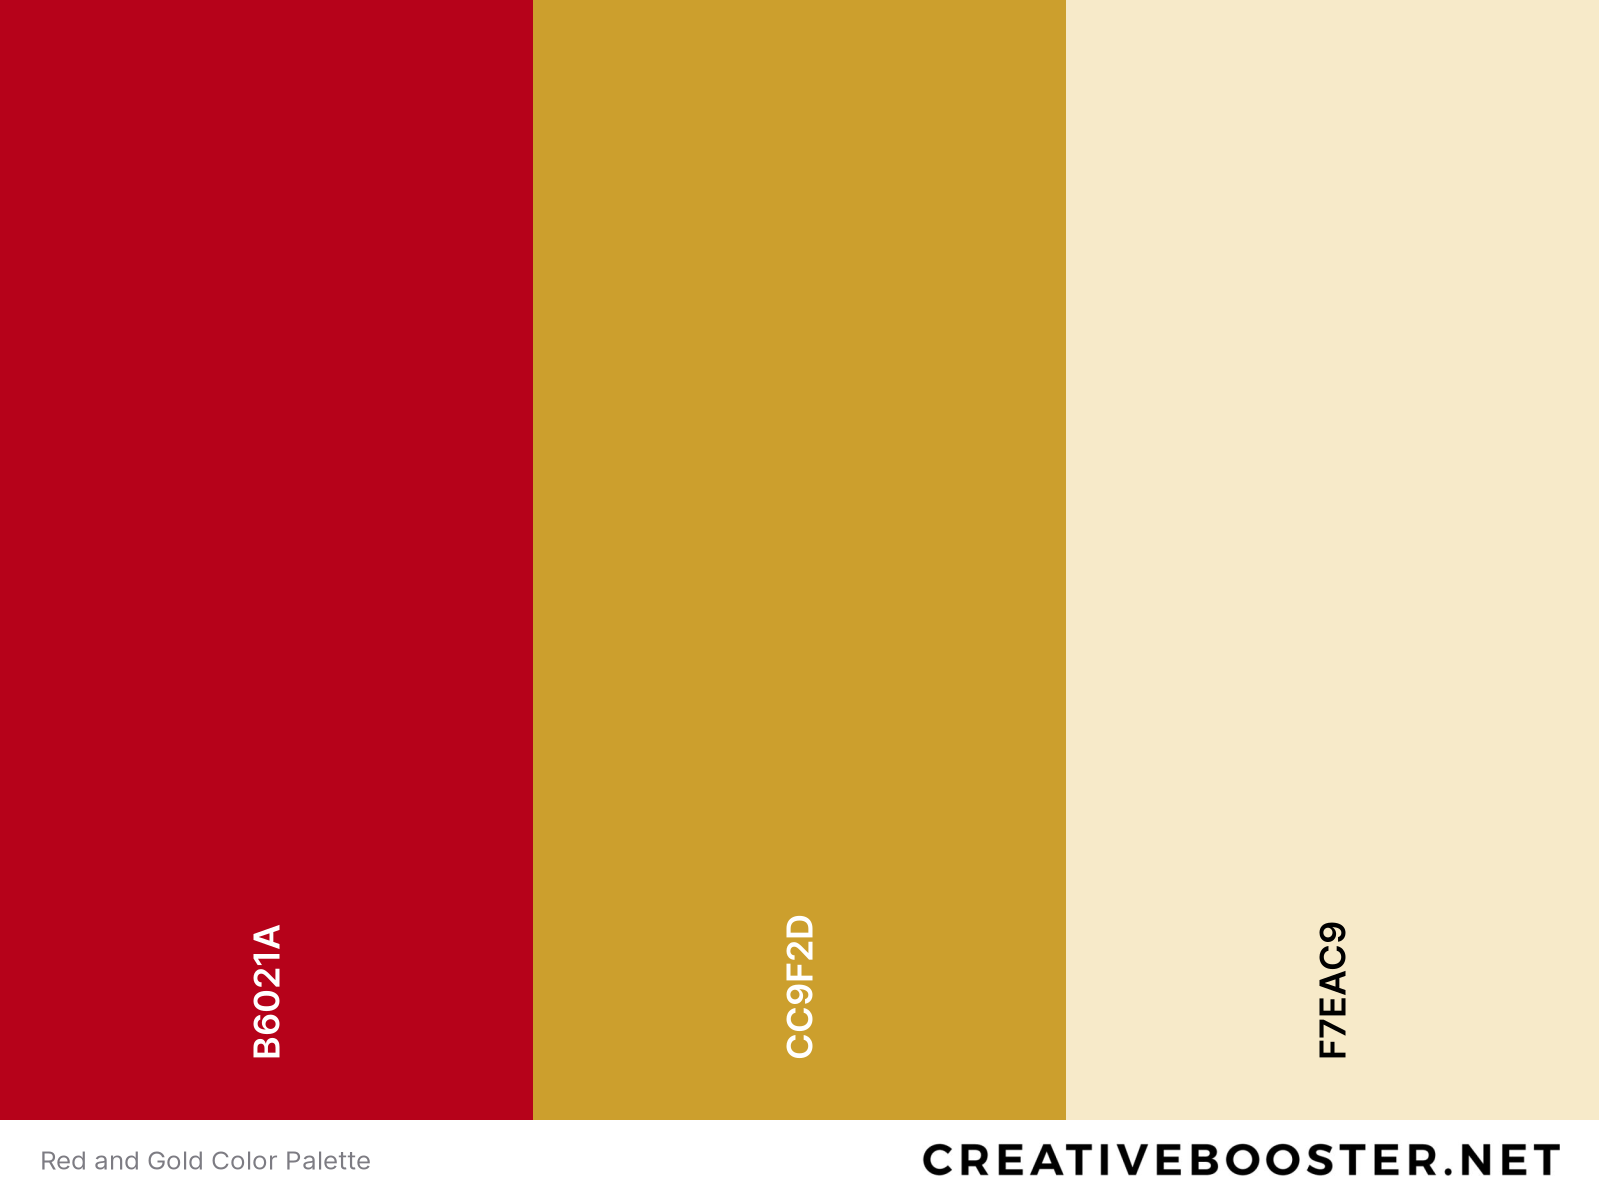 Red and Gold Color Palette